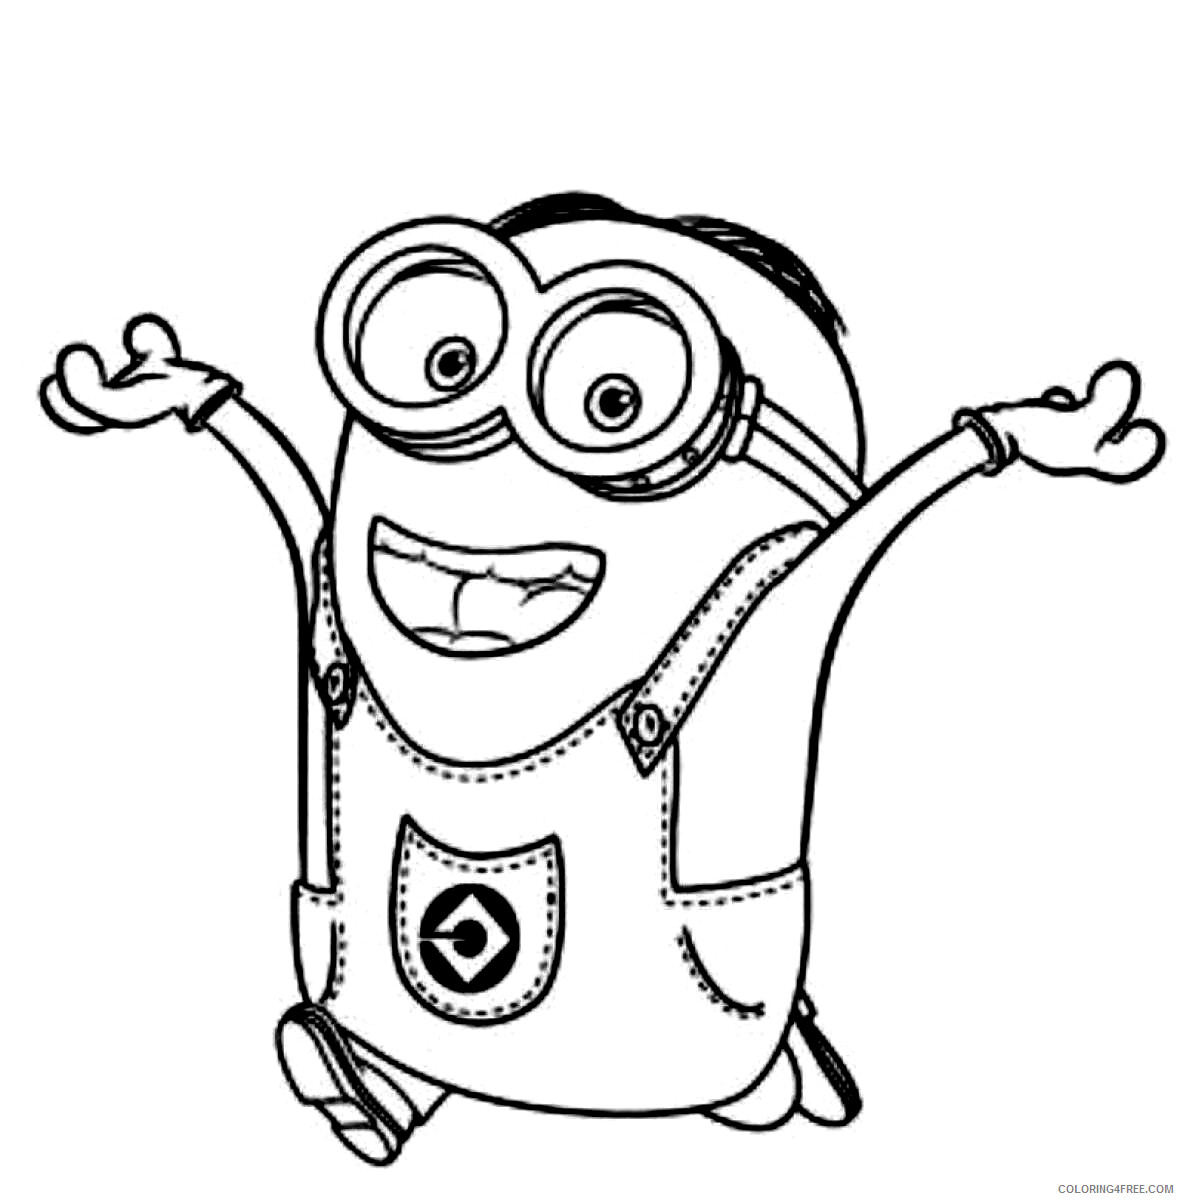 Minions Coloring Pages TV Film minion stuart running a4 Printable 2020 05162 Coloring4free